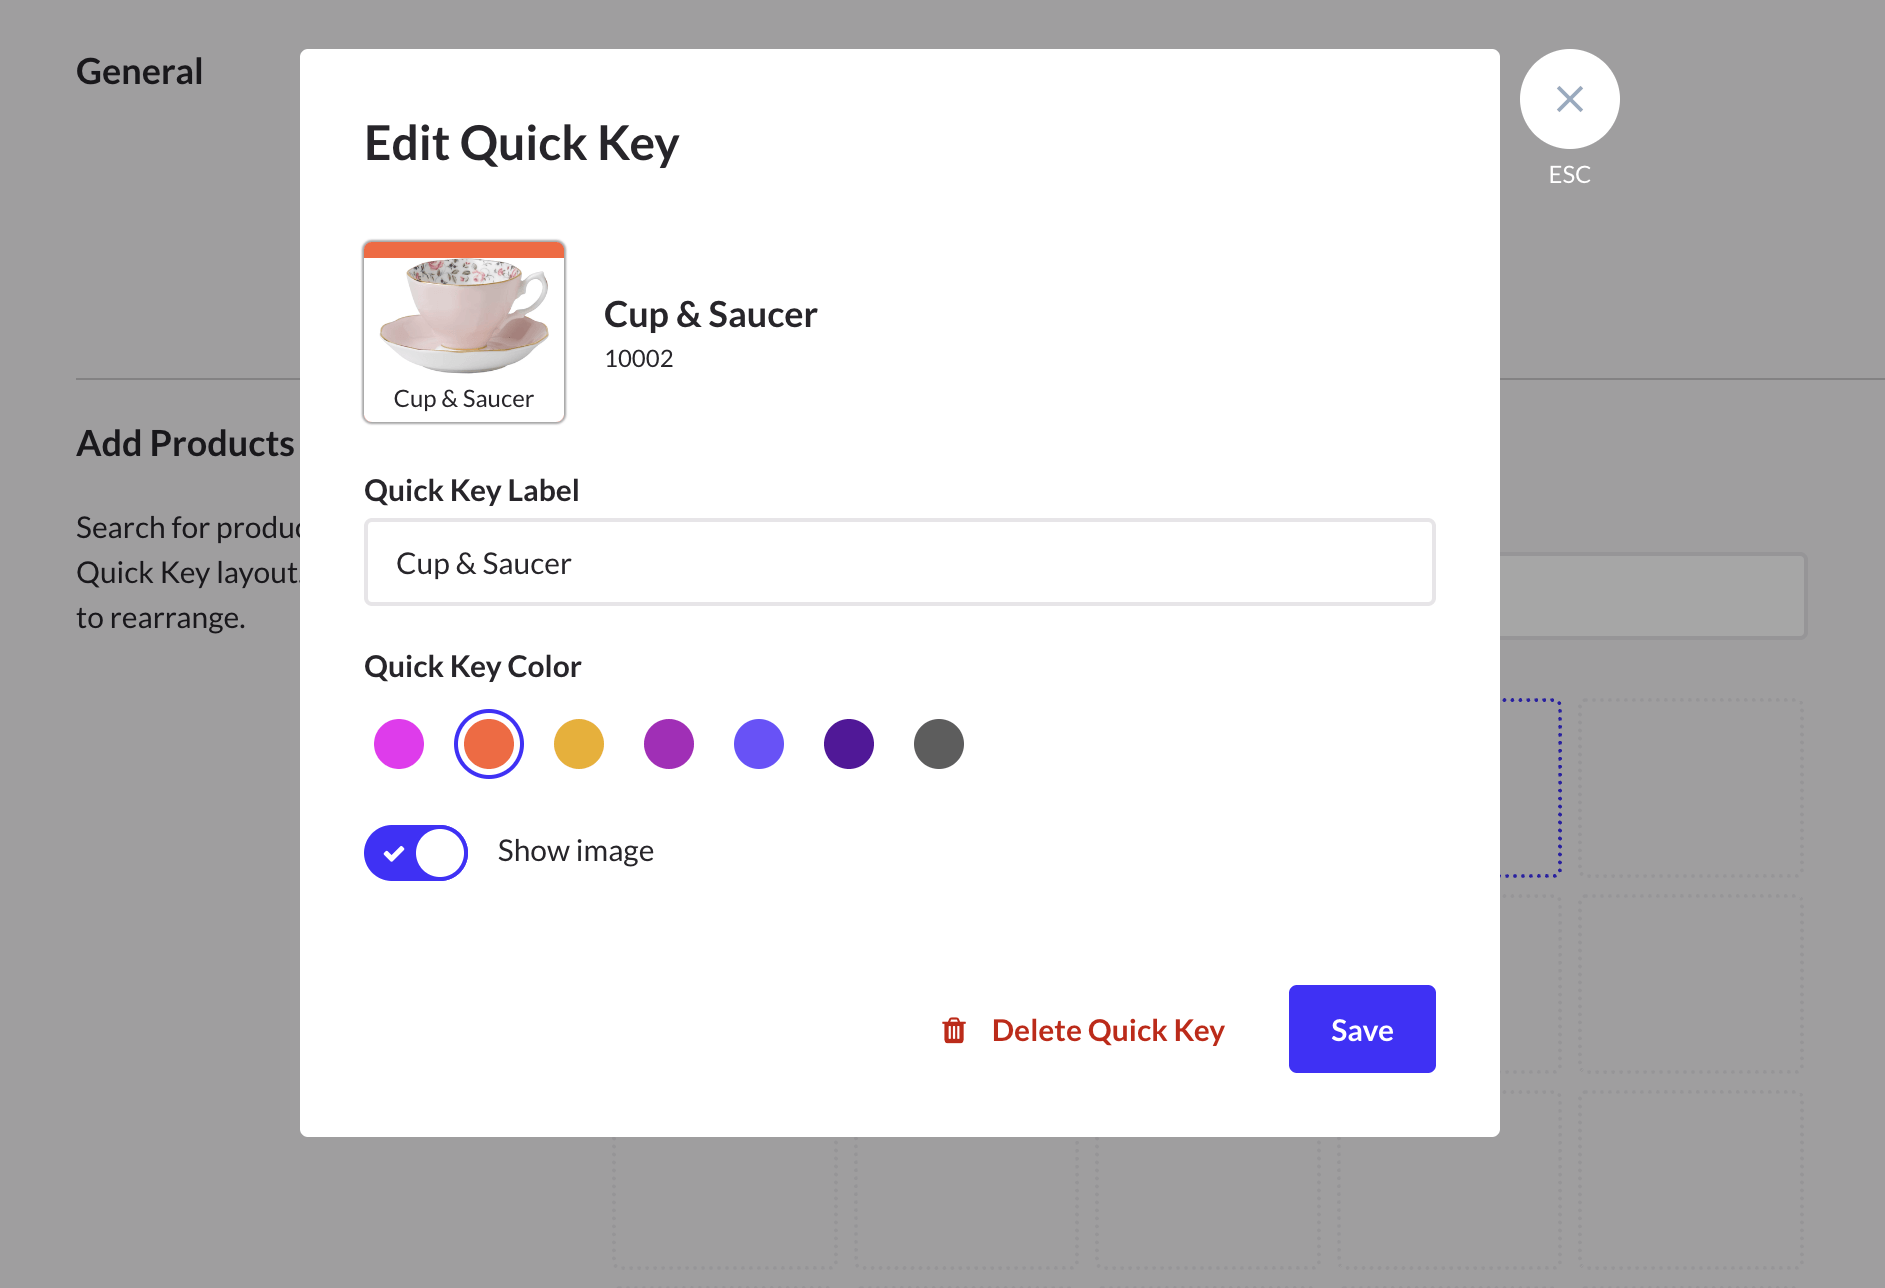 Edit quick key pop up with options for label, color, and product image.